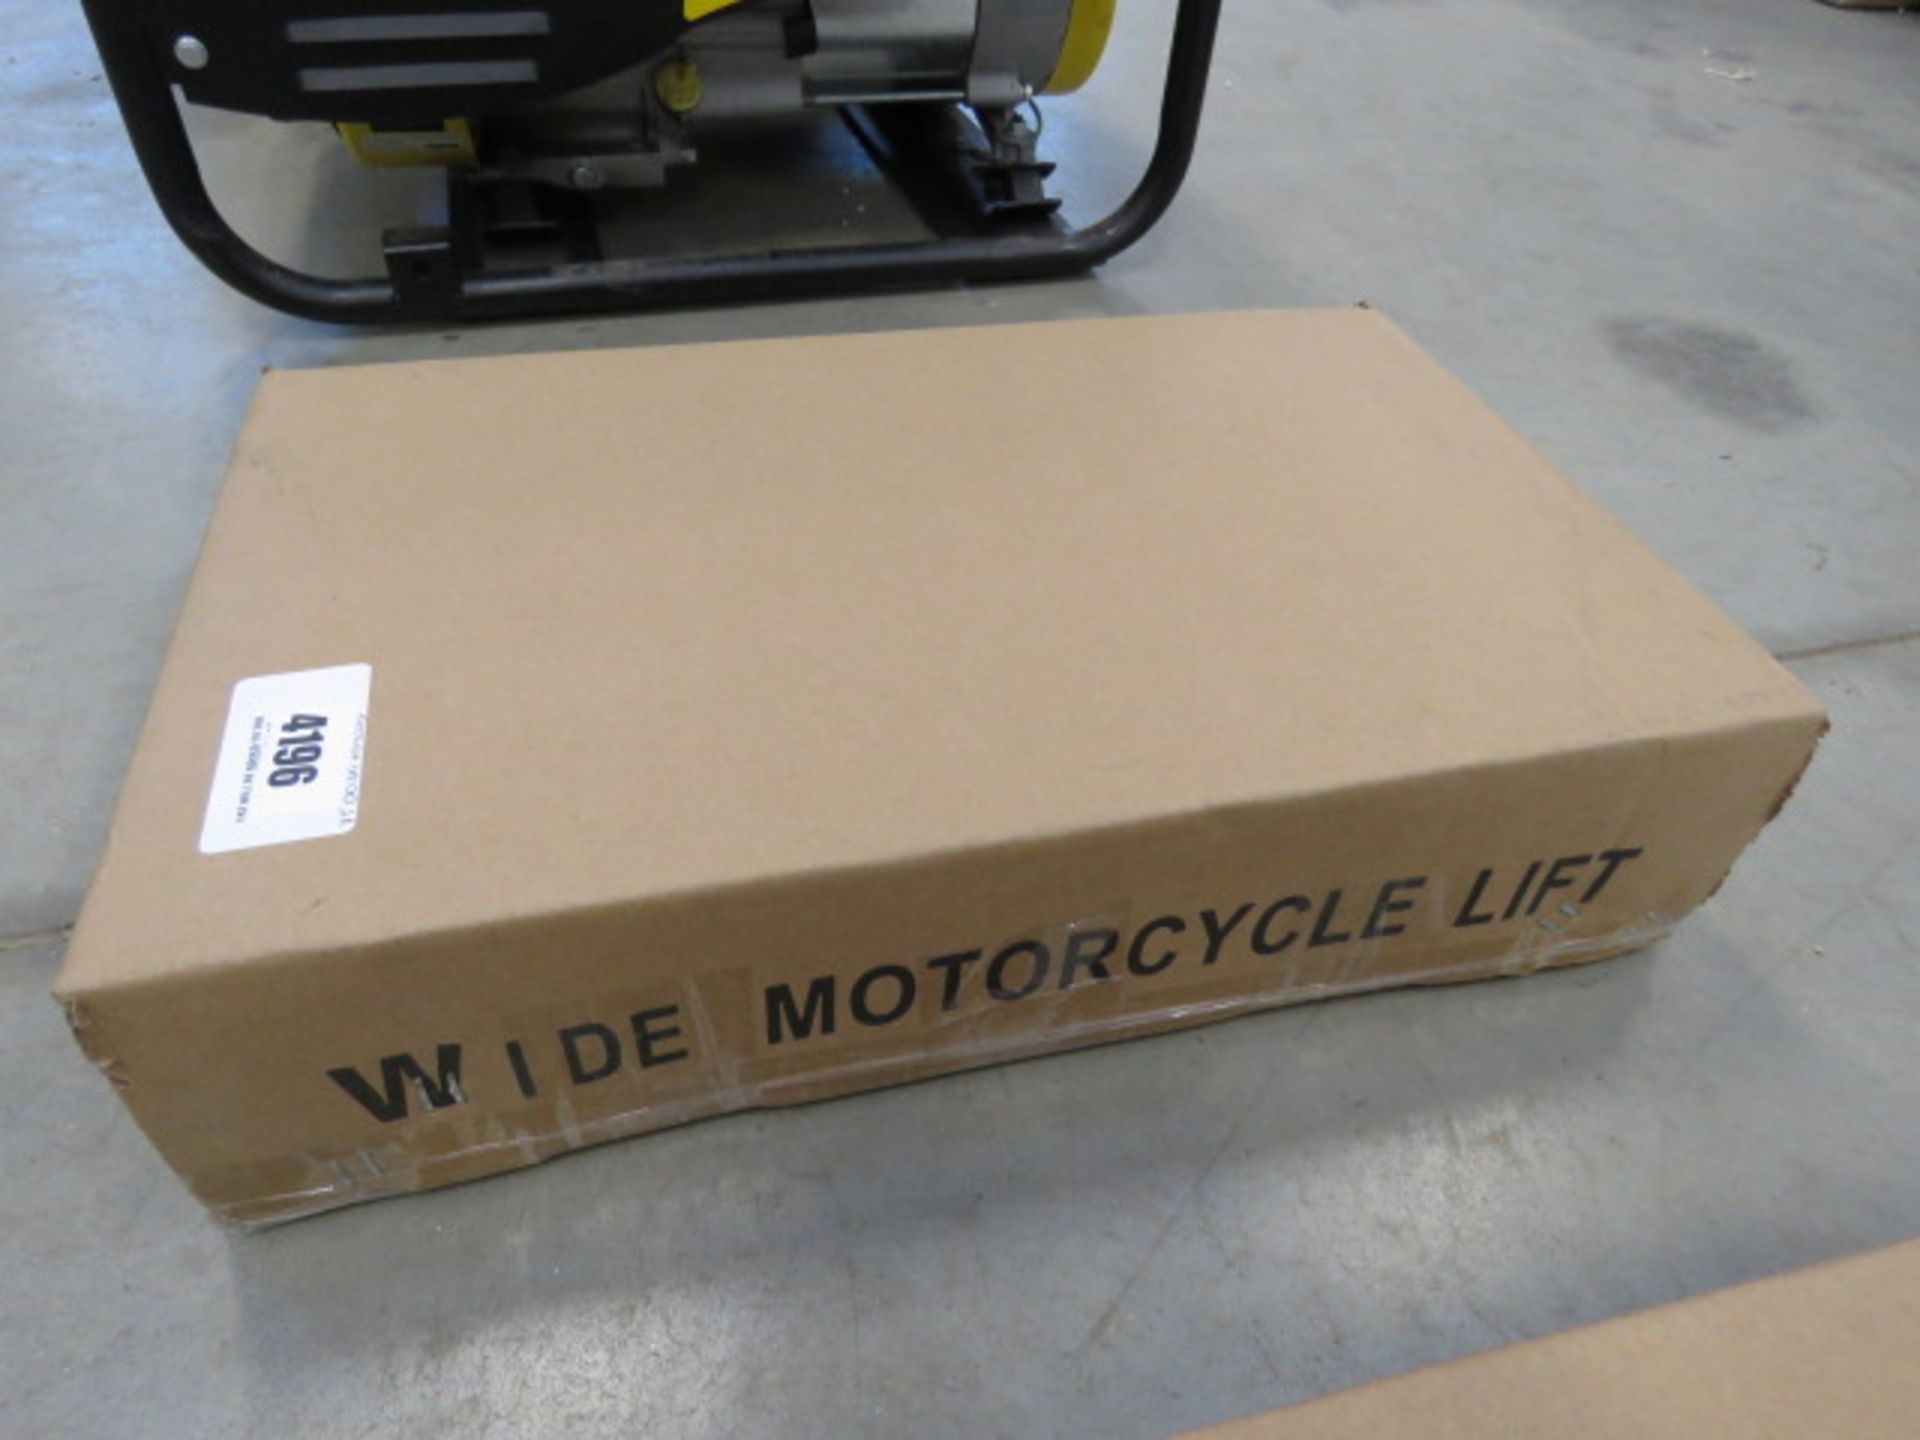 Wide boxed motorcycle lift